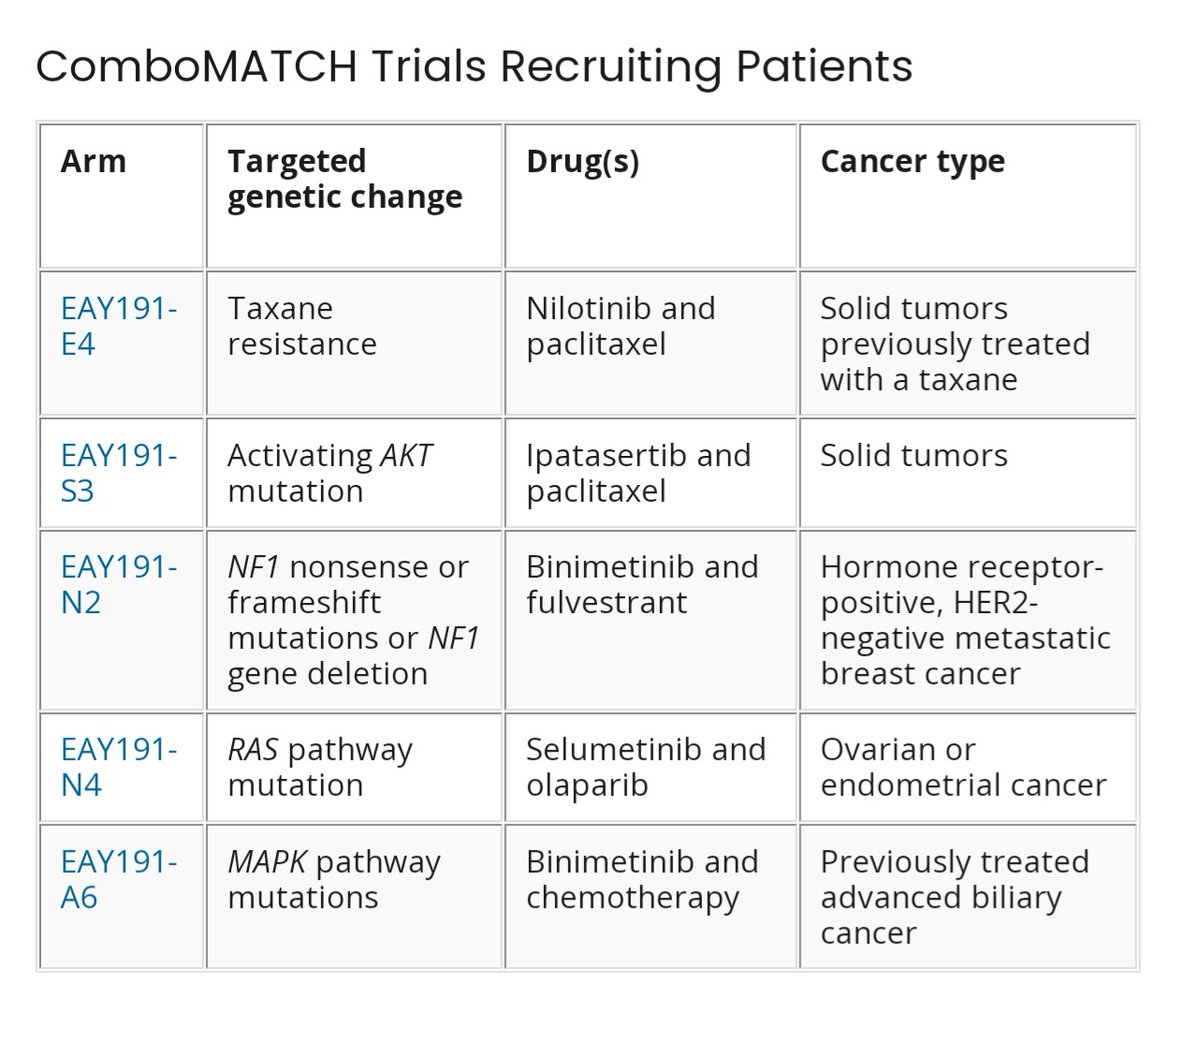 NCI's ComboMATCH gears up for #PrecisionOncology trials ❌ Targeting multiple variants and #drugresistance 🔎 Drug combinations based on #tumorbiology #targetedtherapy #oncology #clinicaltrial #CancerAwareness #CancerResearch